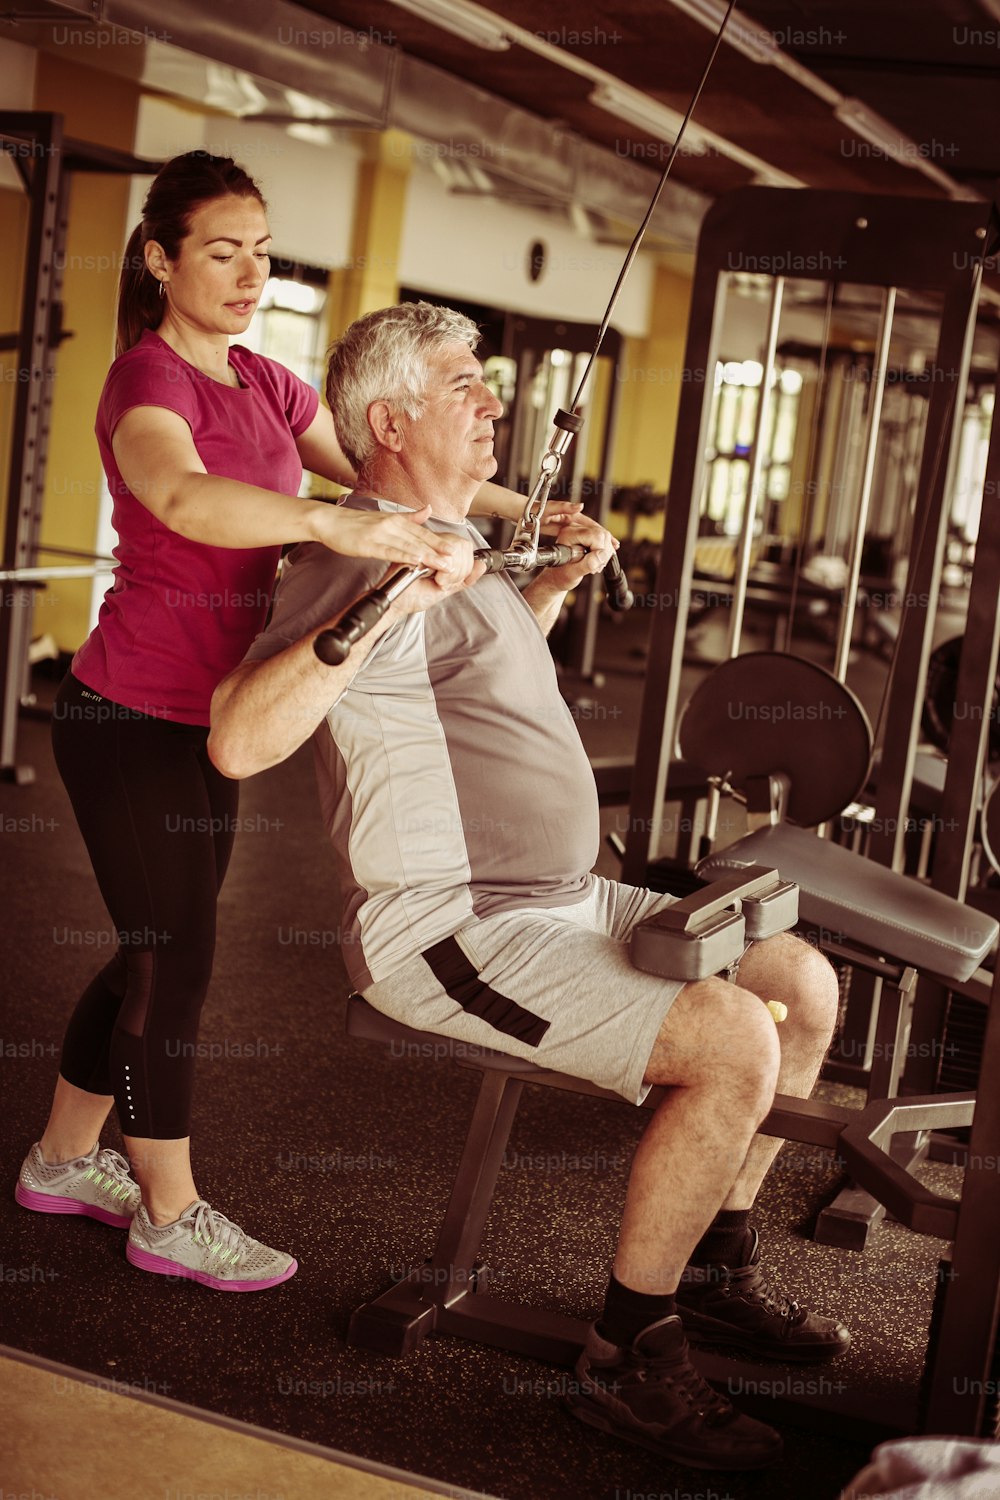 Personal trainer working exercise with senior man in the gym.